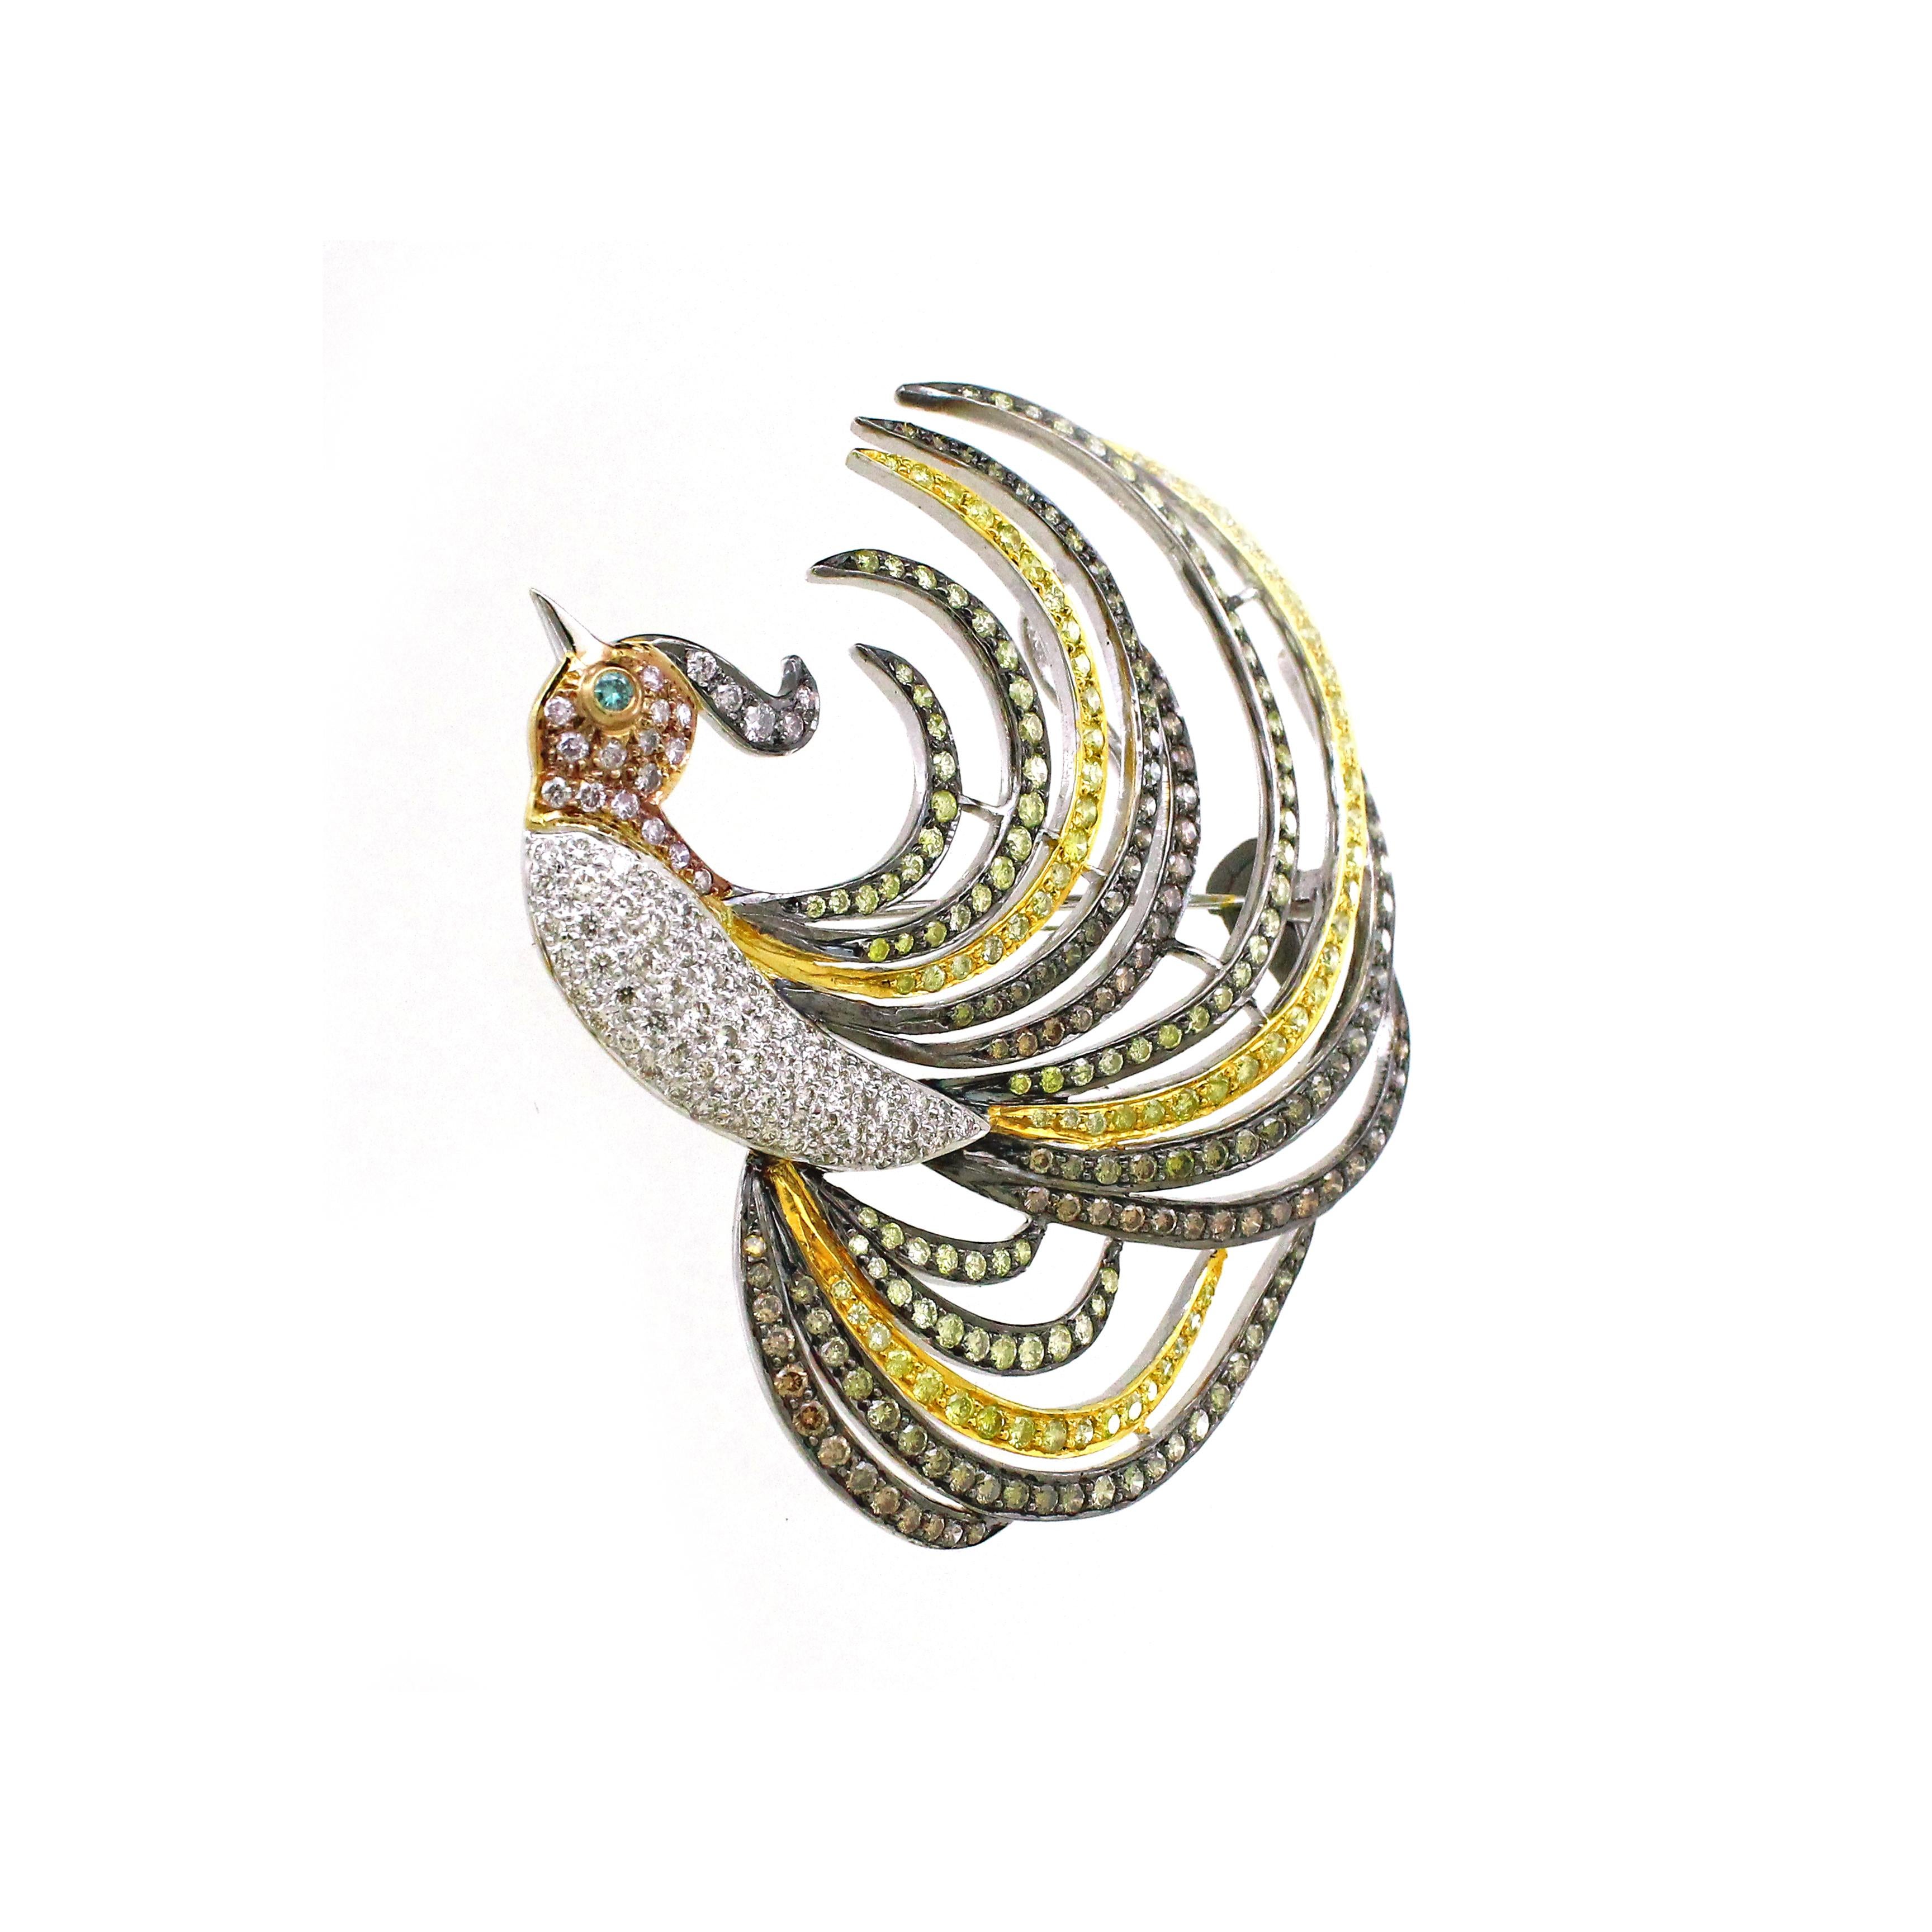 Embark on a flight of elegance with this exquisite bird-inspired brooch, a mesmerizing fusion of nature's beauty and meticulous craftsmanship. Crafted in 18K white gold, weighing 22.22 grams, this captivating piece channels the grace of avian